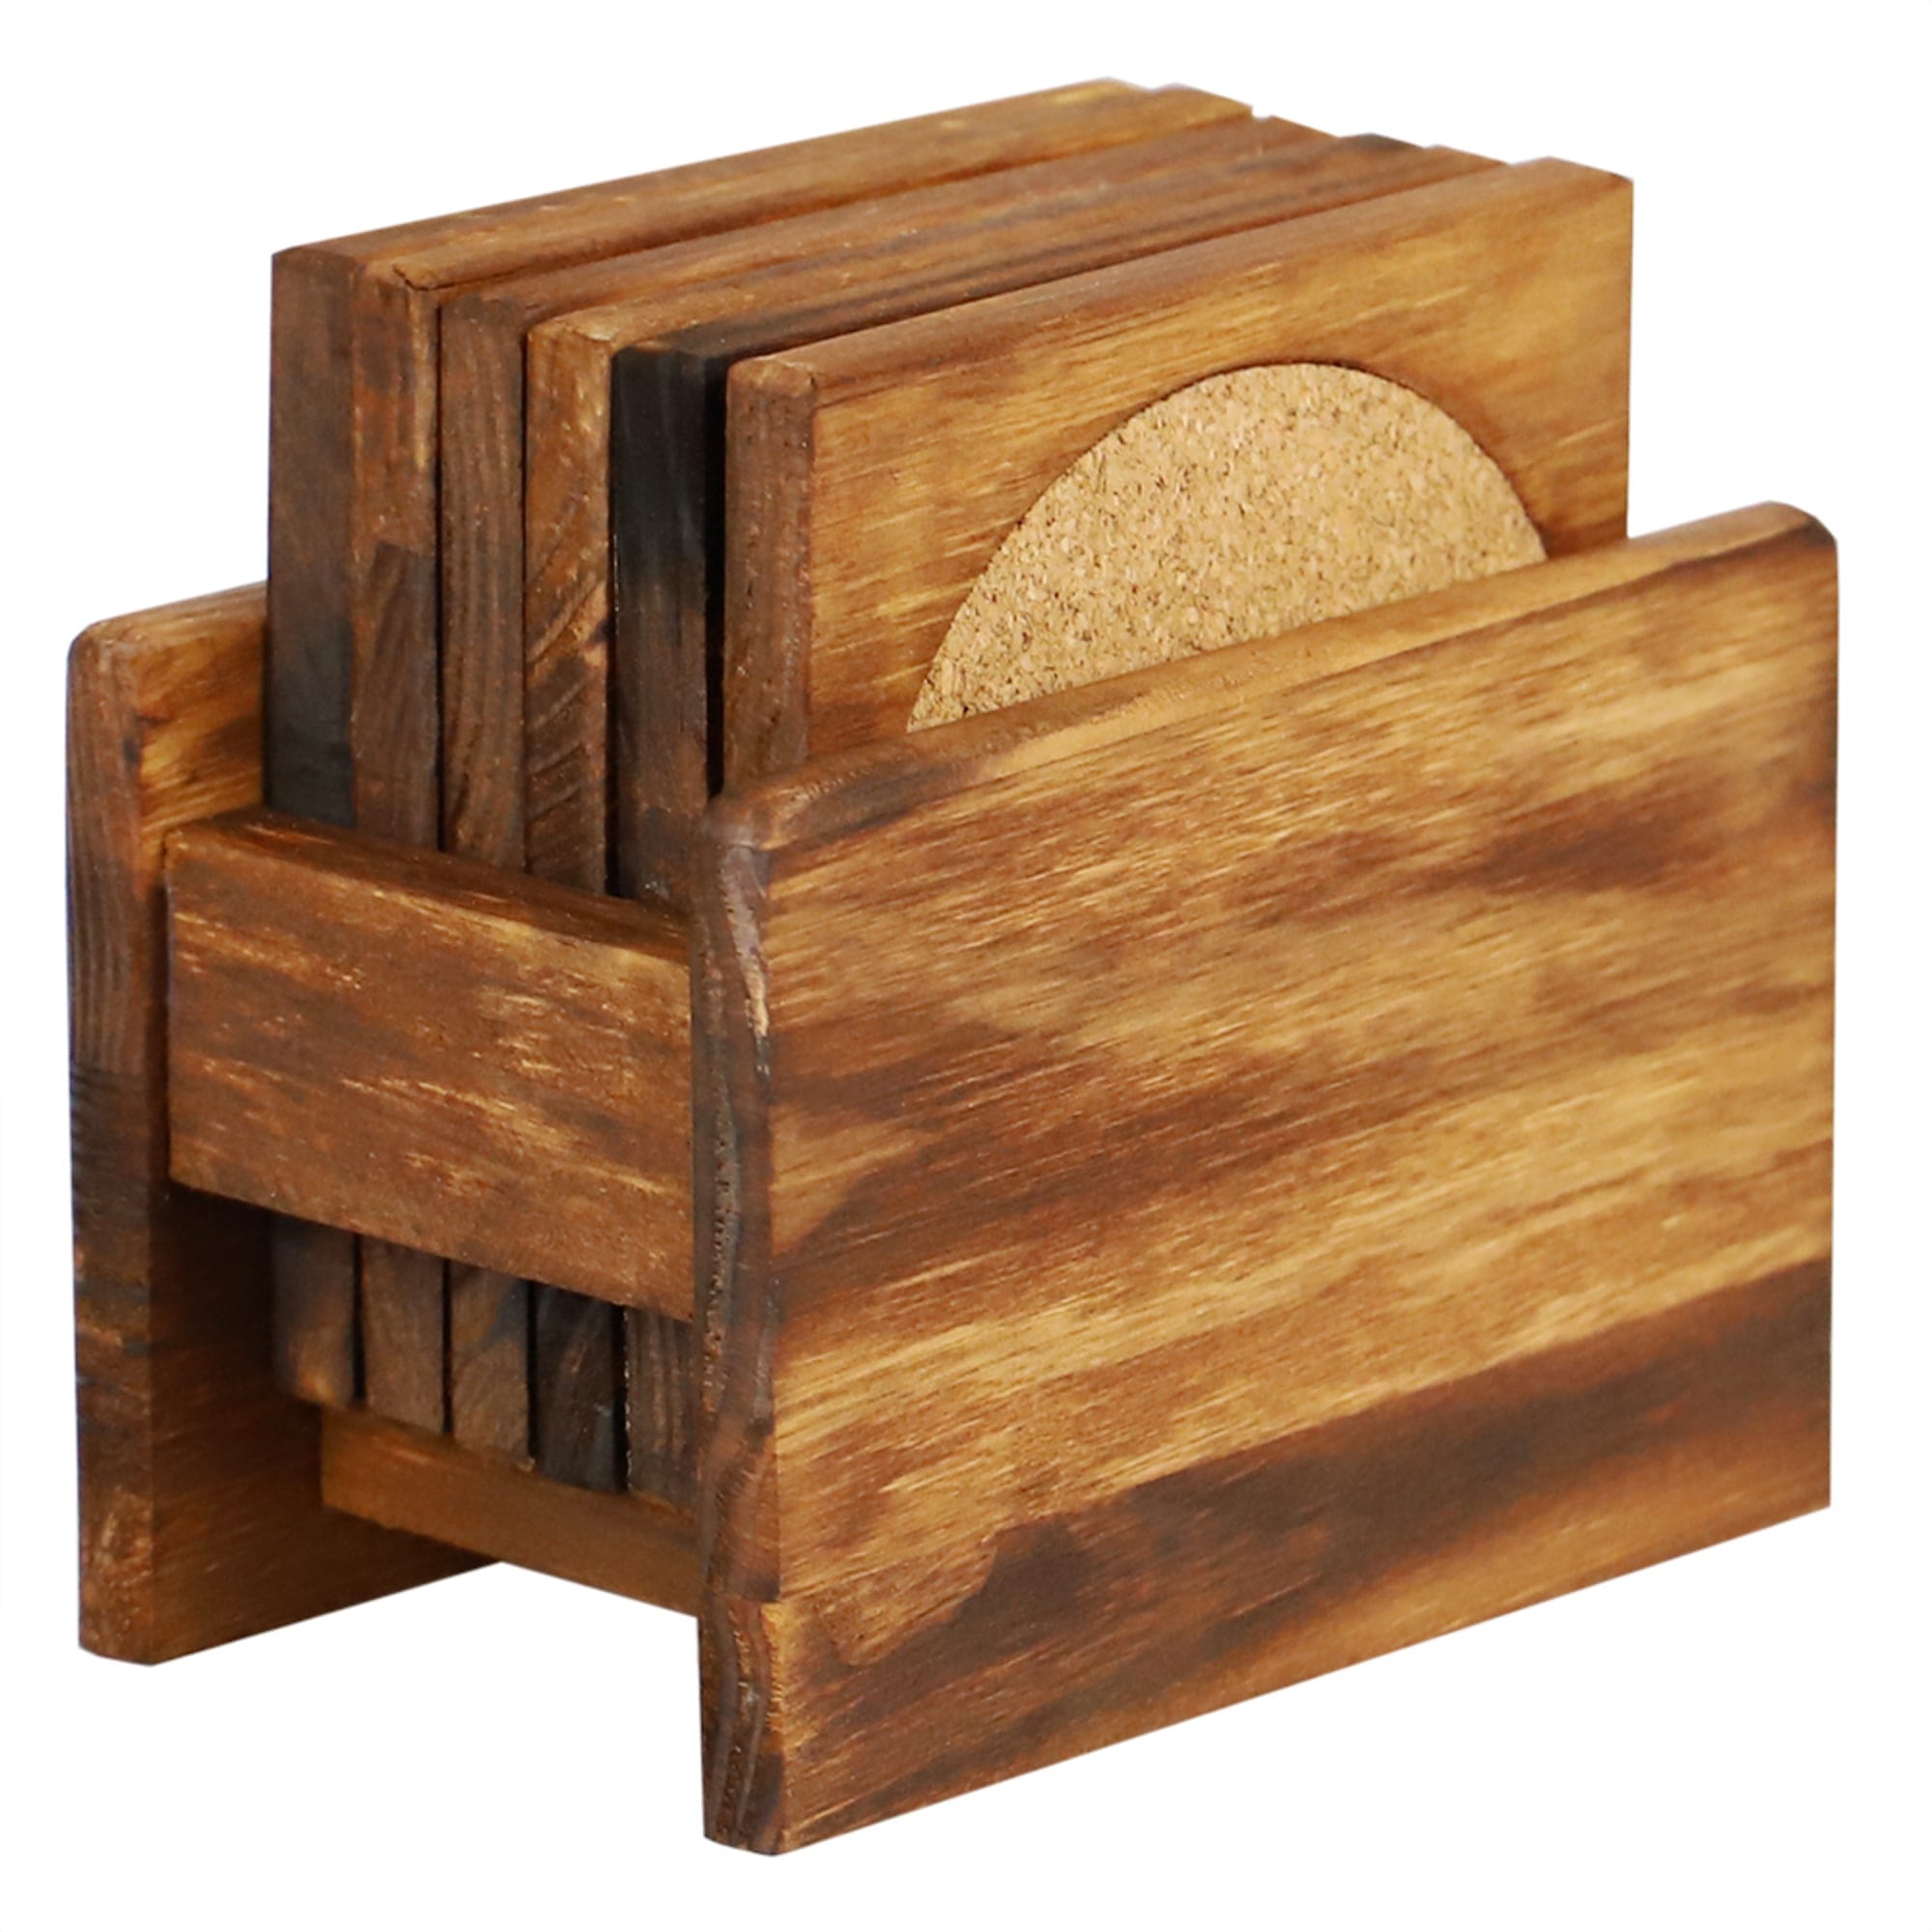 Home Basics Pine Wood Square Coasters with Absorbent Cork Insert, (Set of 6), and Holder $6.00 EACH, CASE PACK OF 12